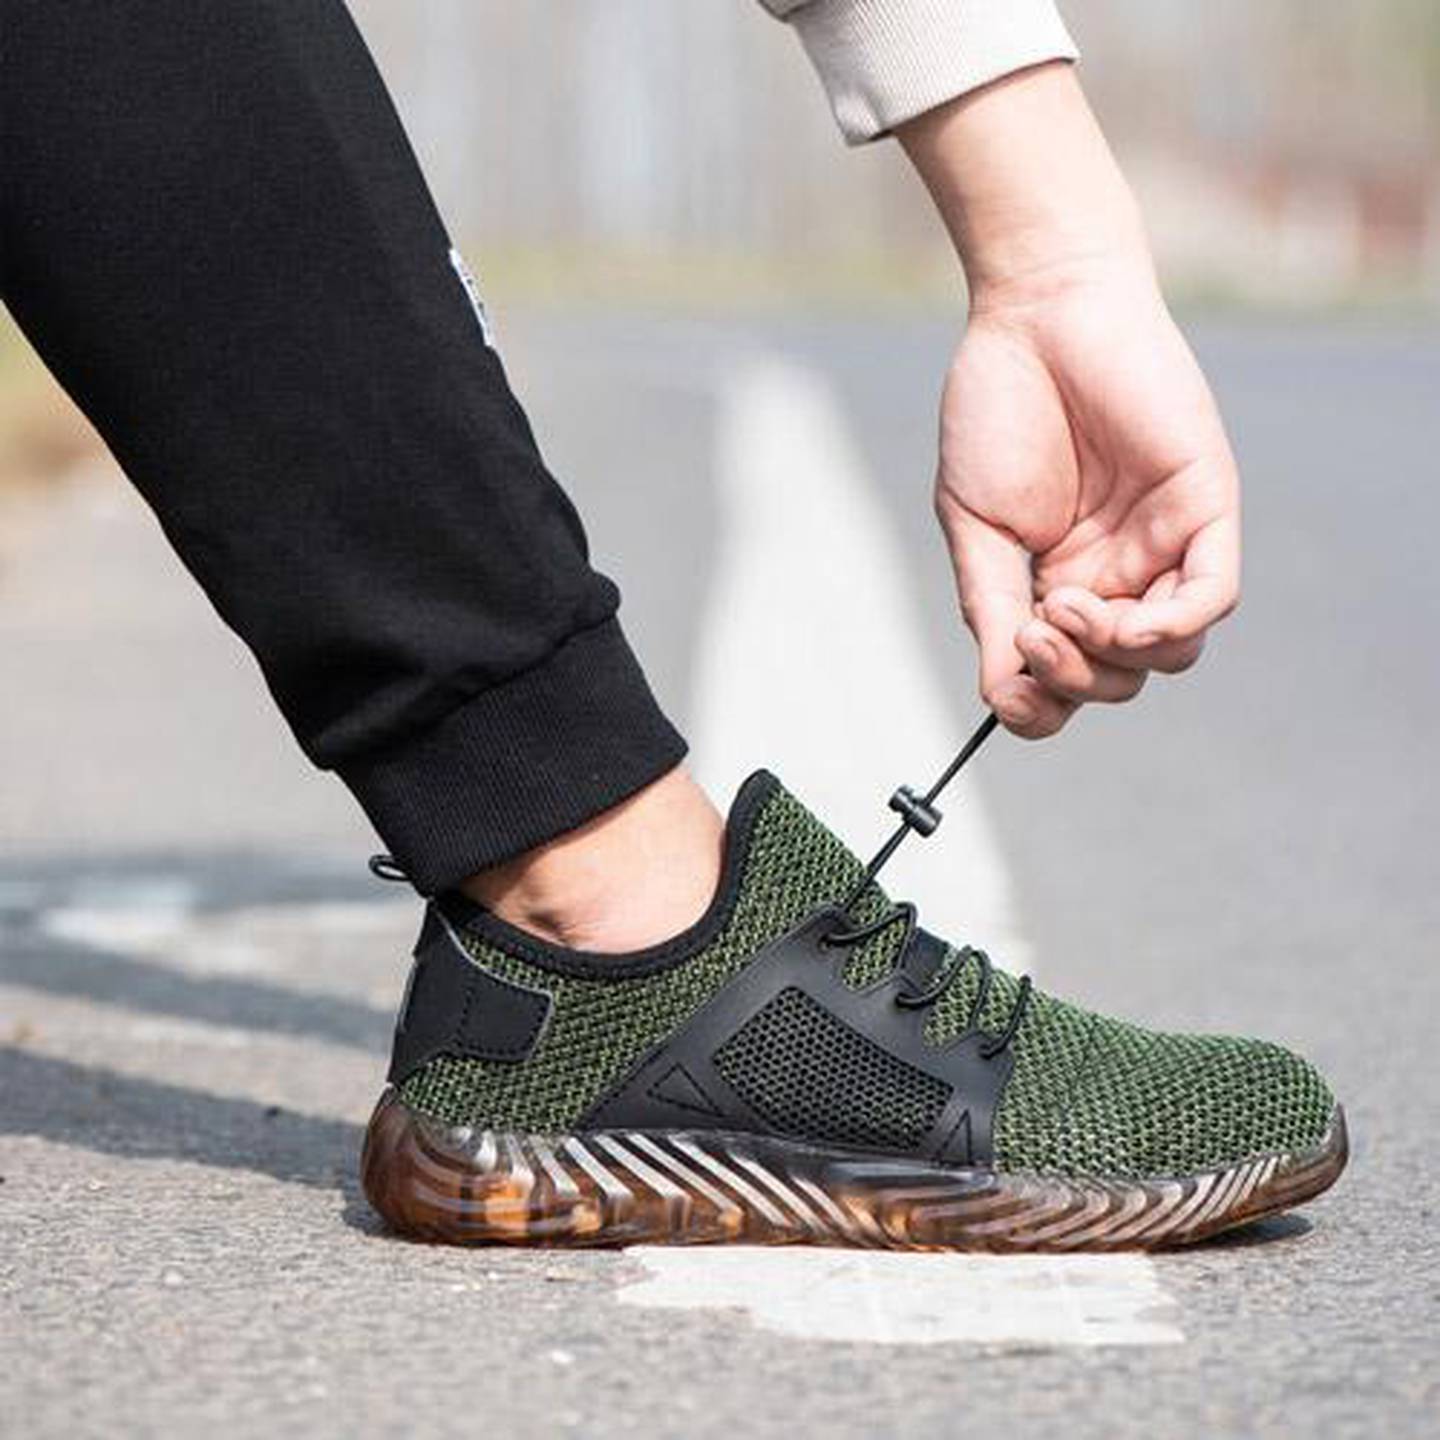 These Ryder Green ‘indestructible’ shoes could be the toughest you ever ...